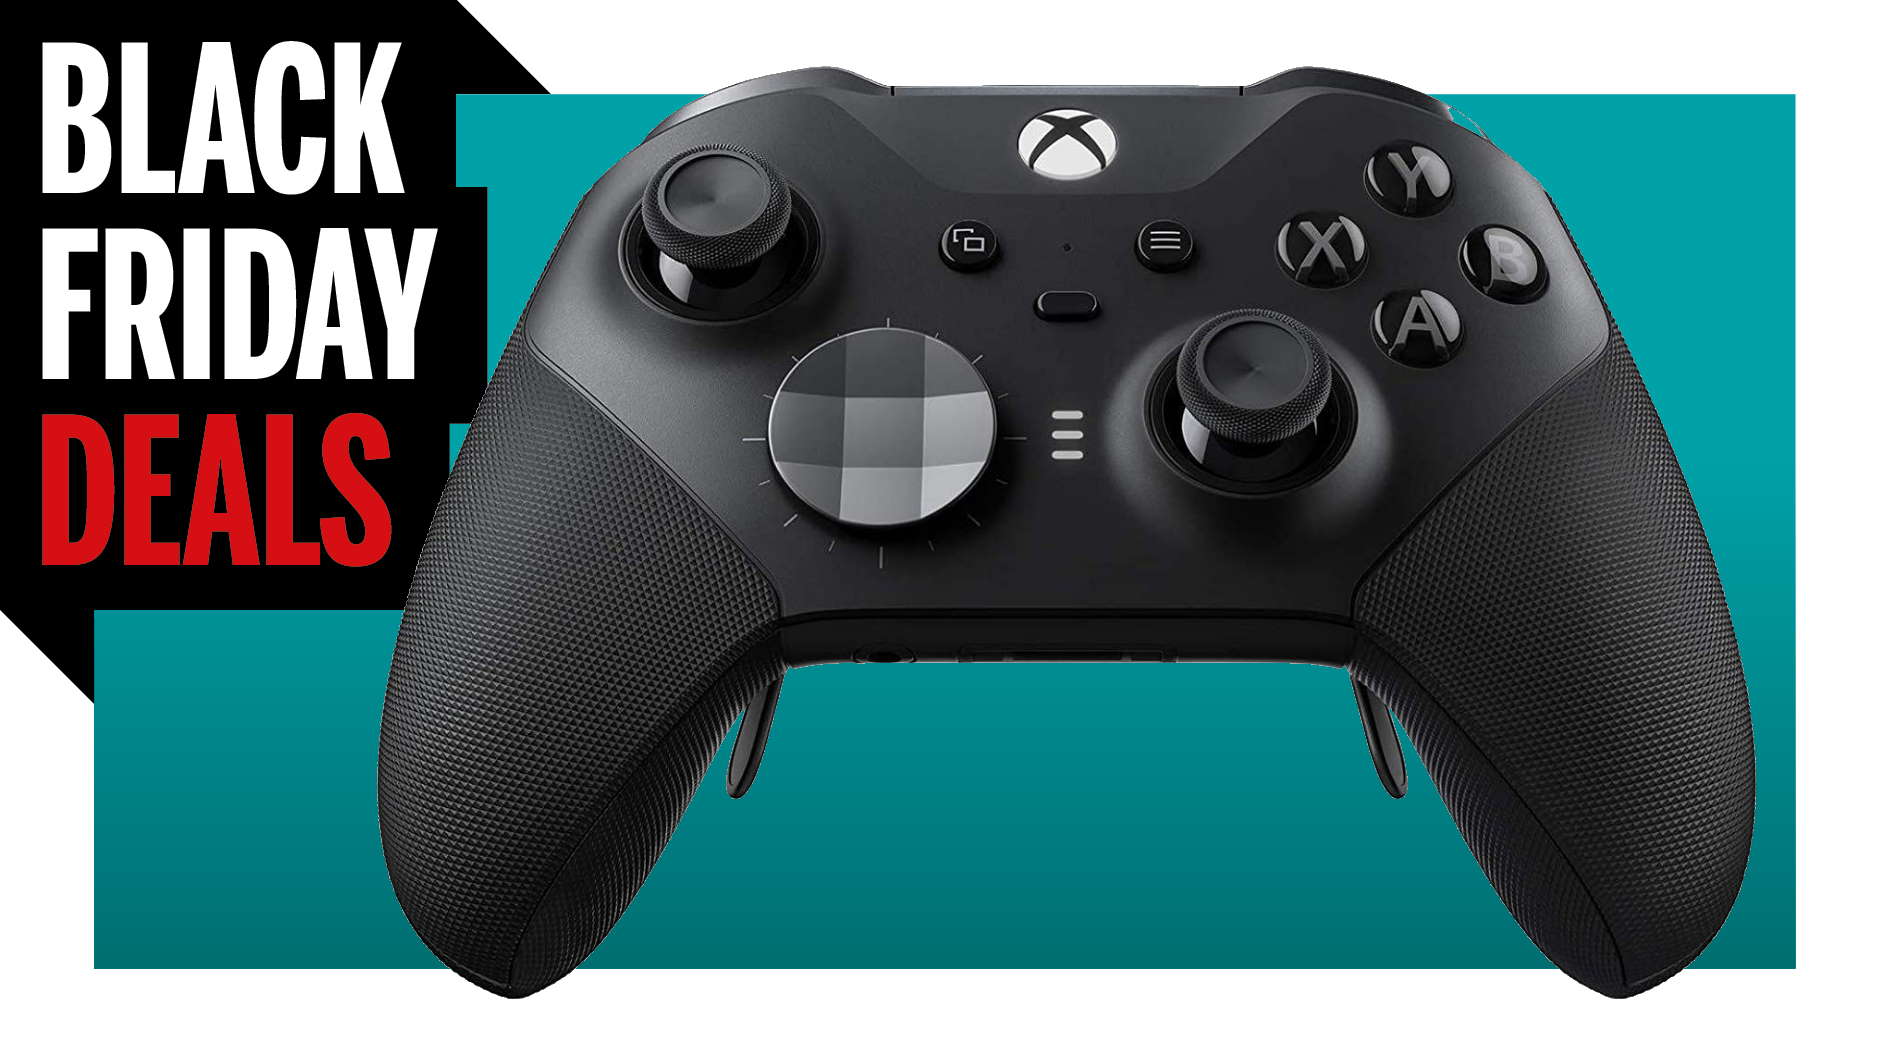 The Xbox Elite Series 2 is the best controller around and is 